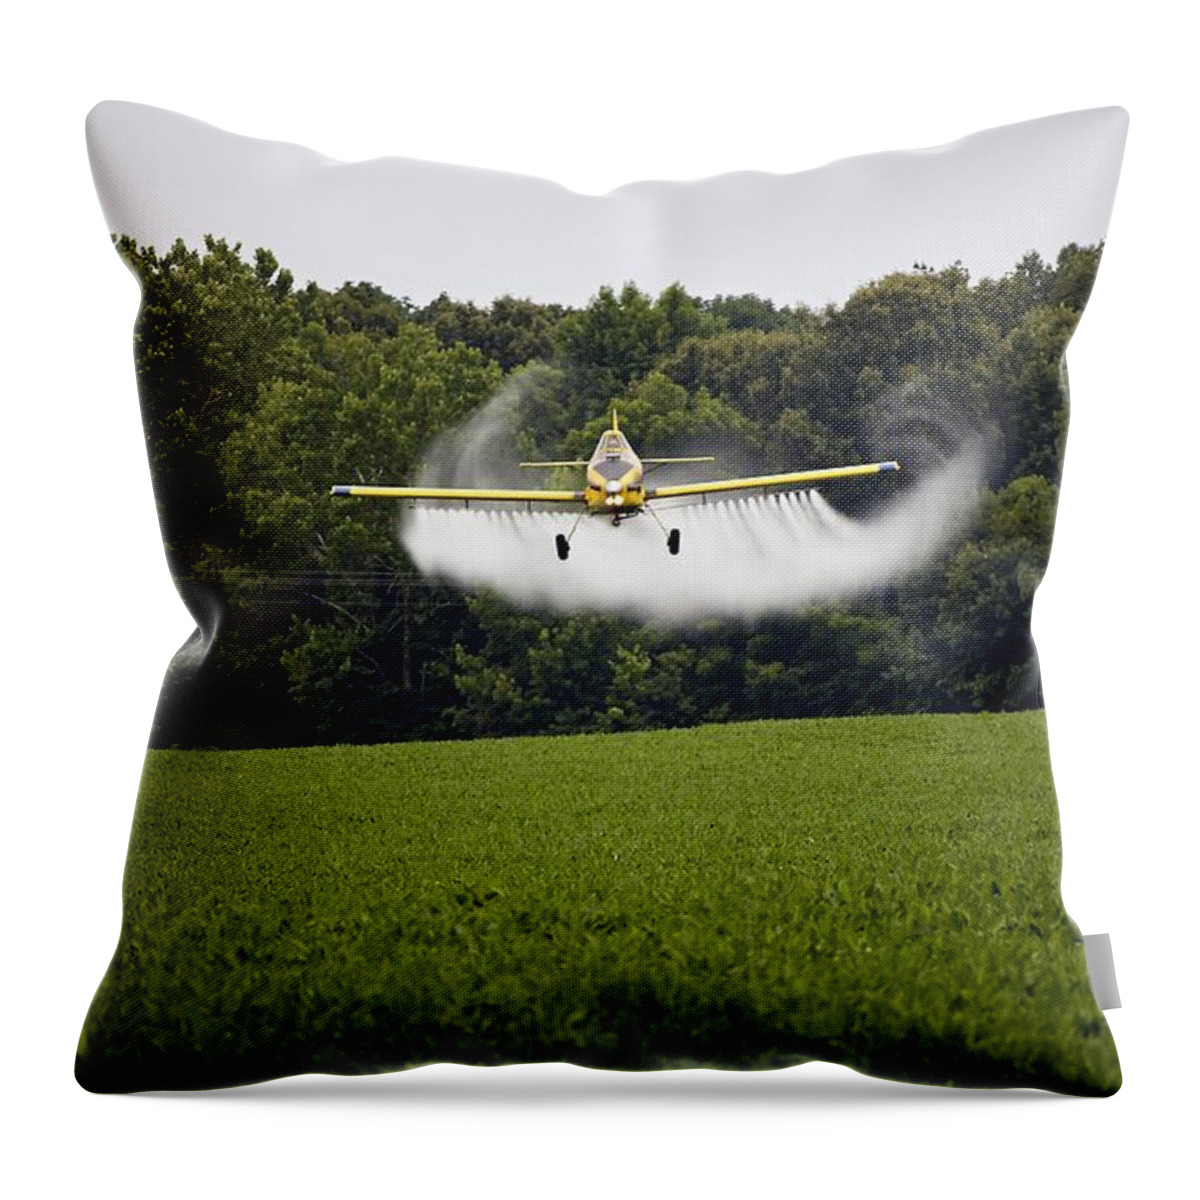 Ag Throw Pillow featuring the photograph Air Tractor by David Zarecor